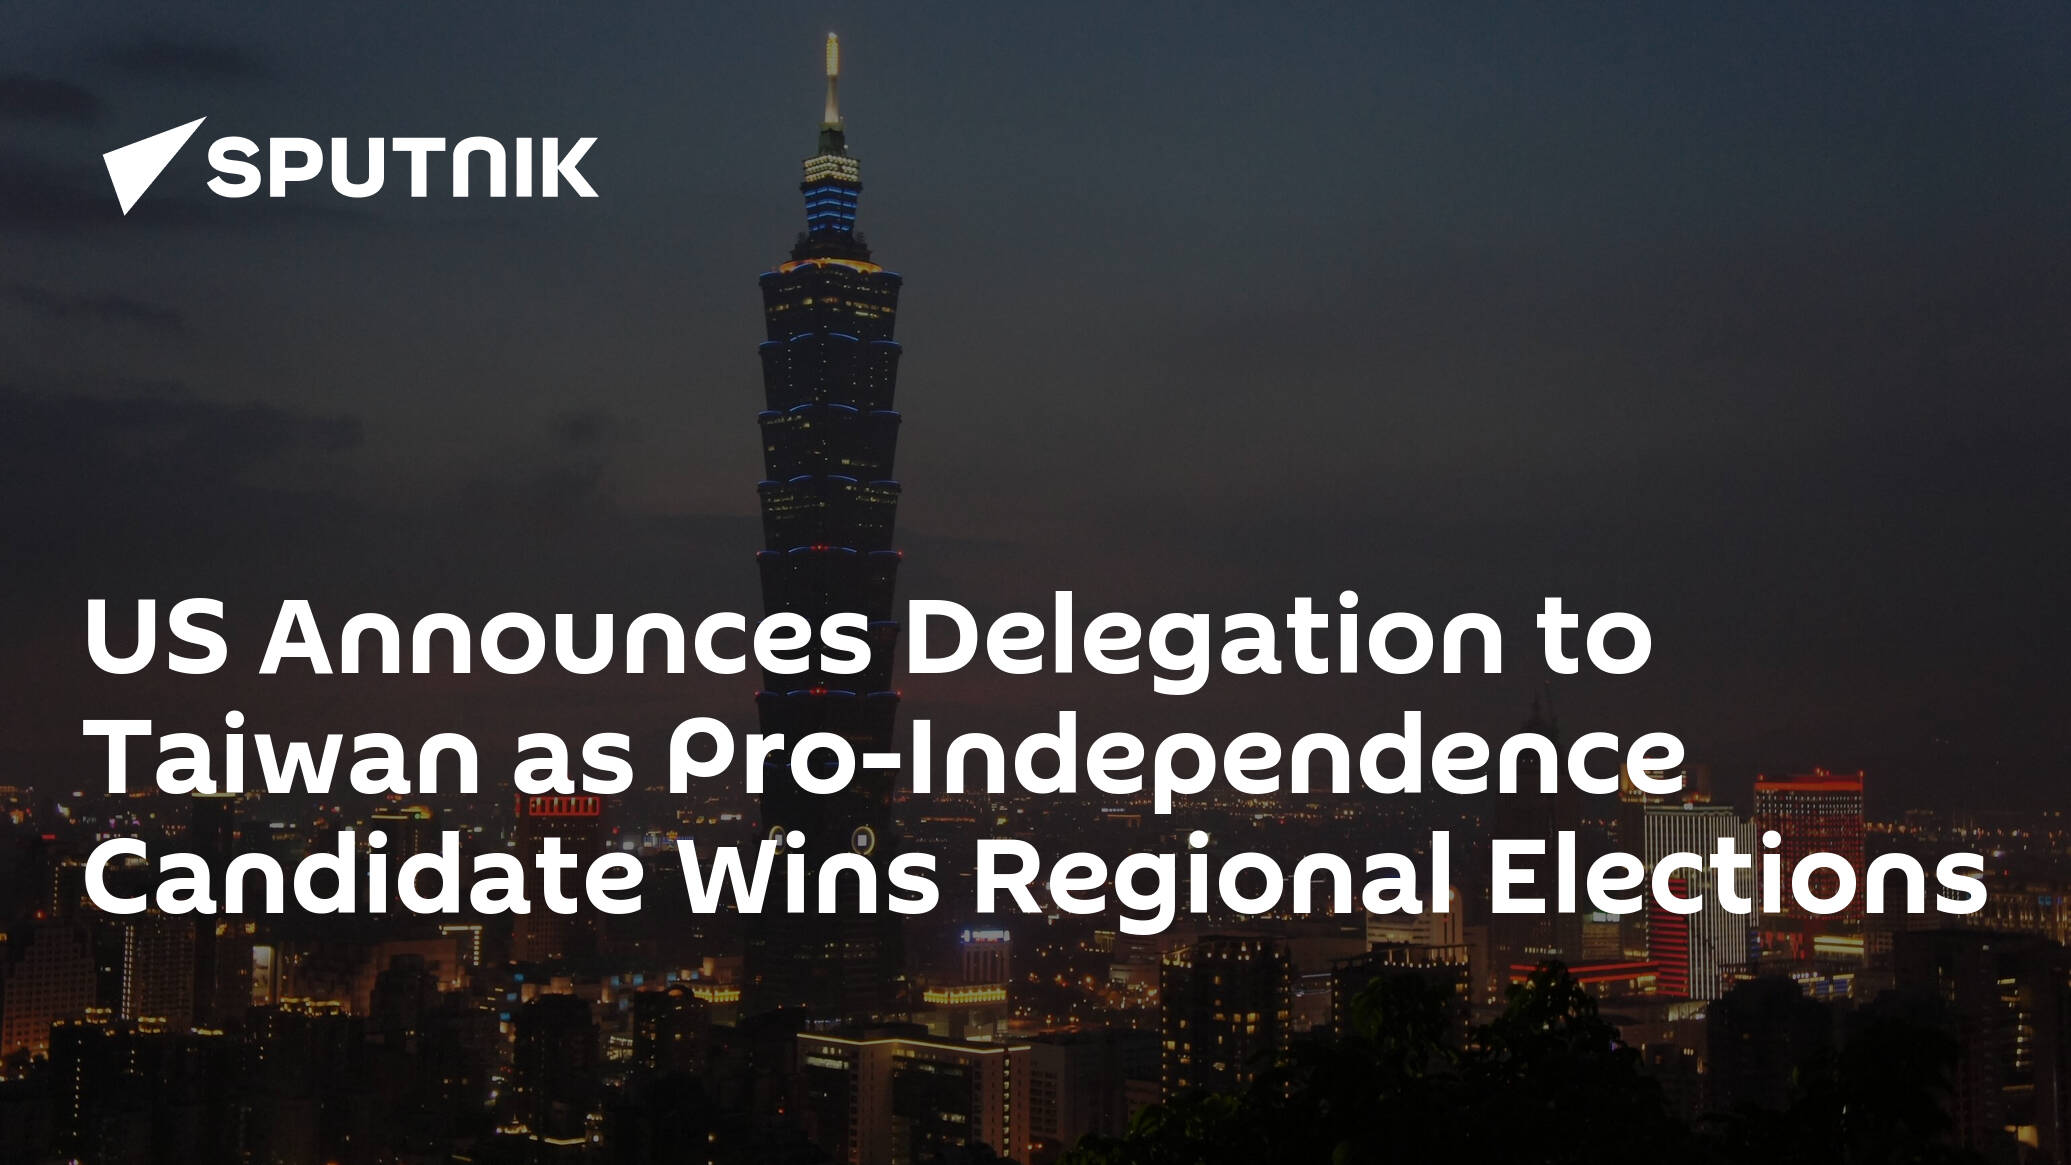 US Announces Delegation to Taiwan as Pro-Independence Candidate Wins Regional Elections